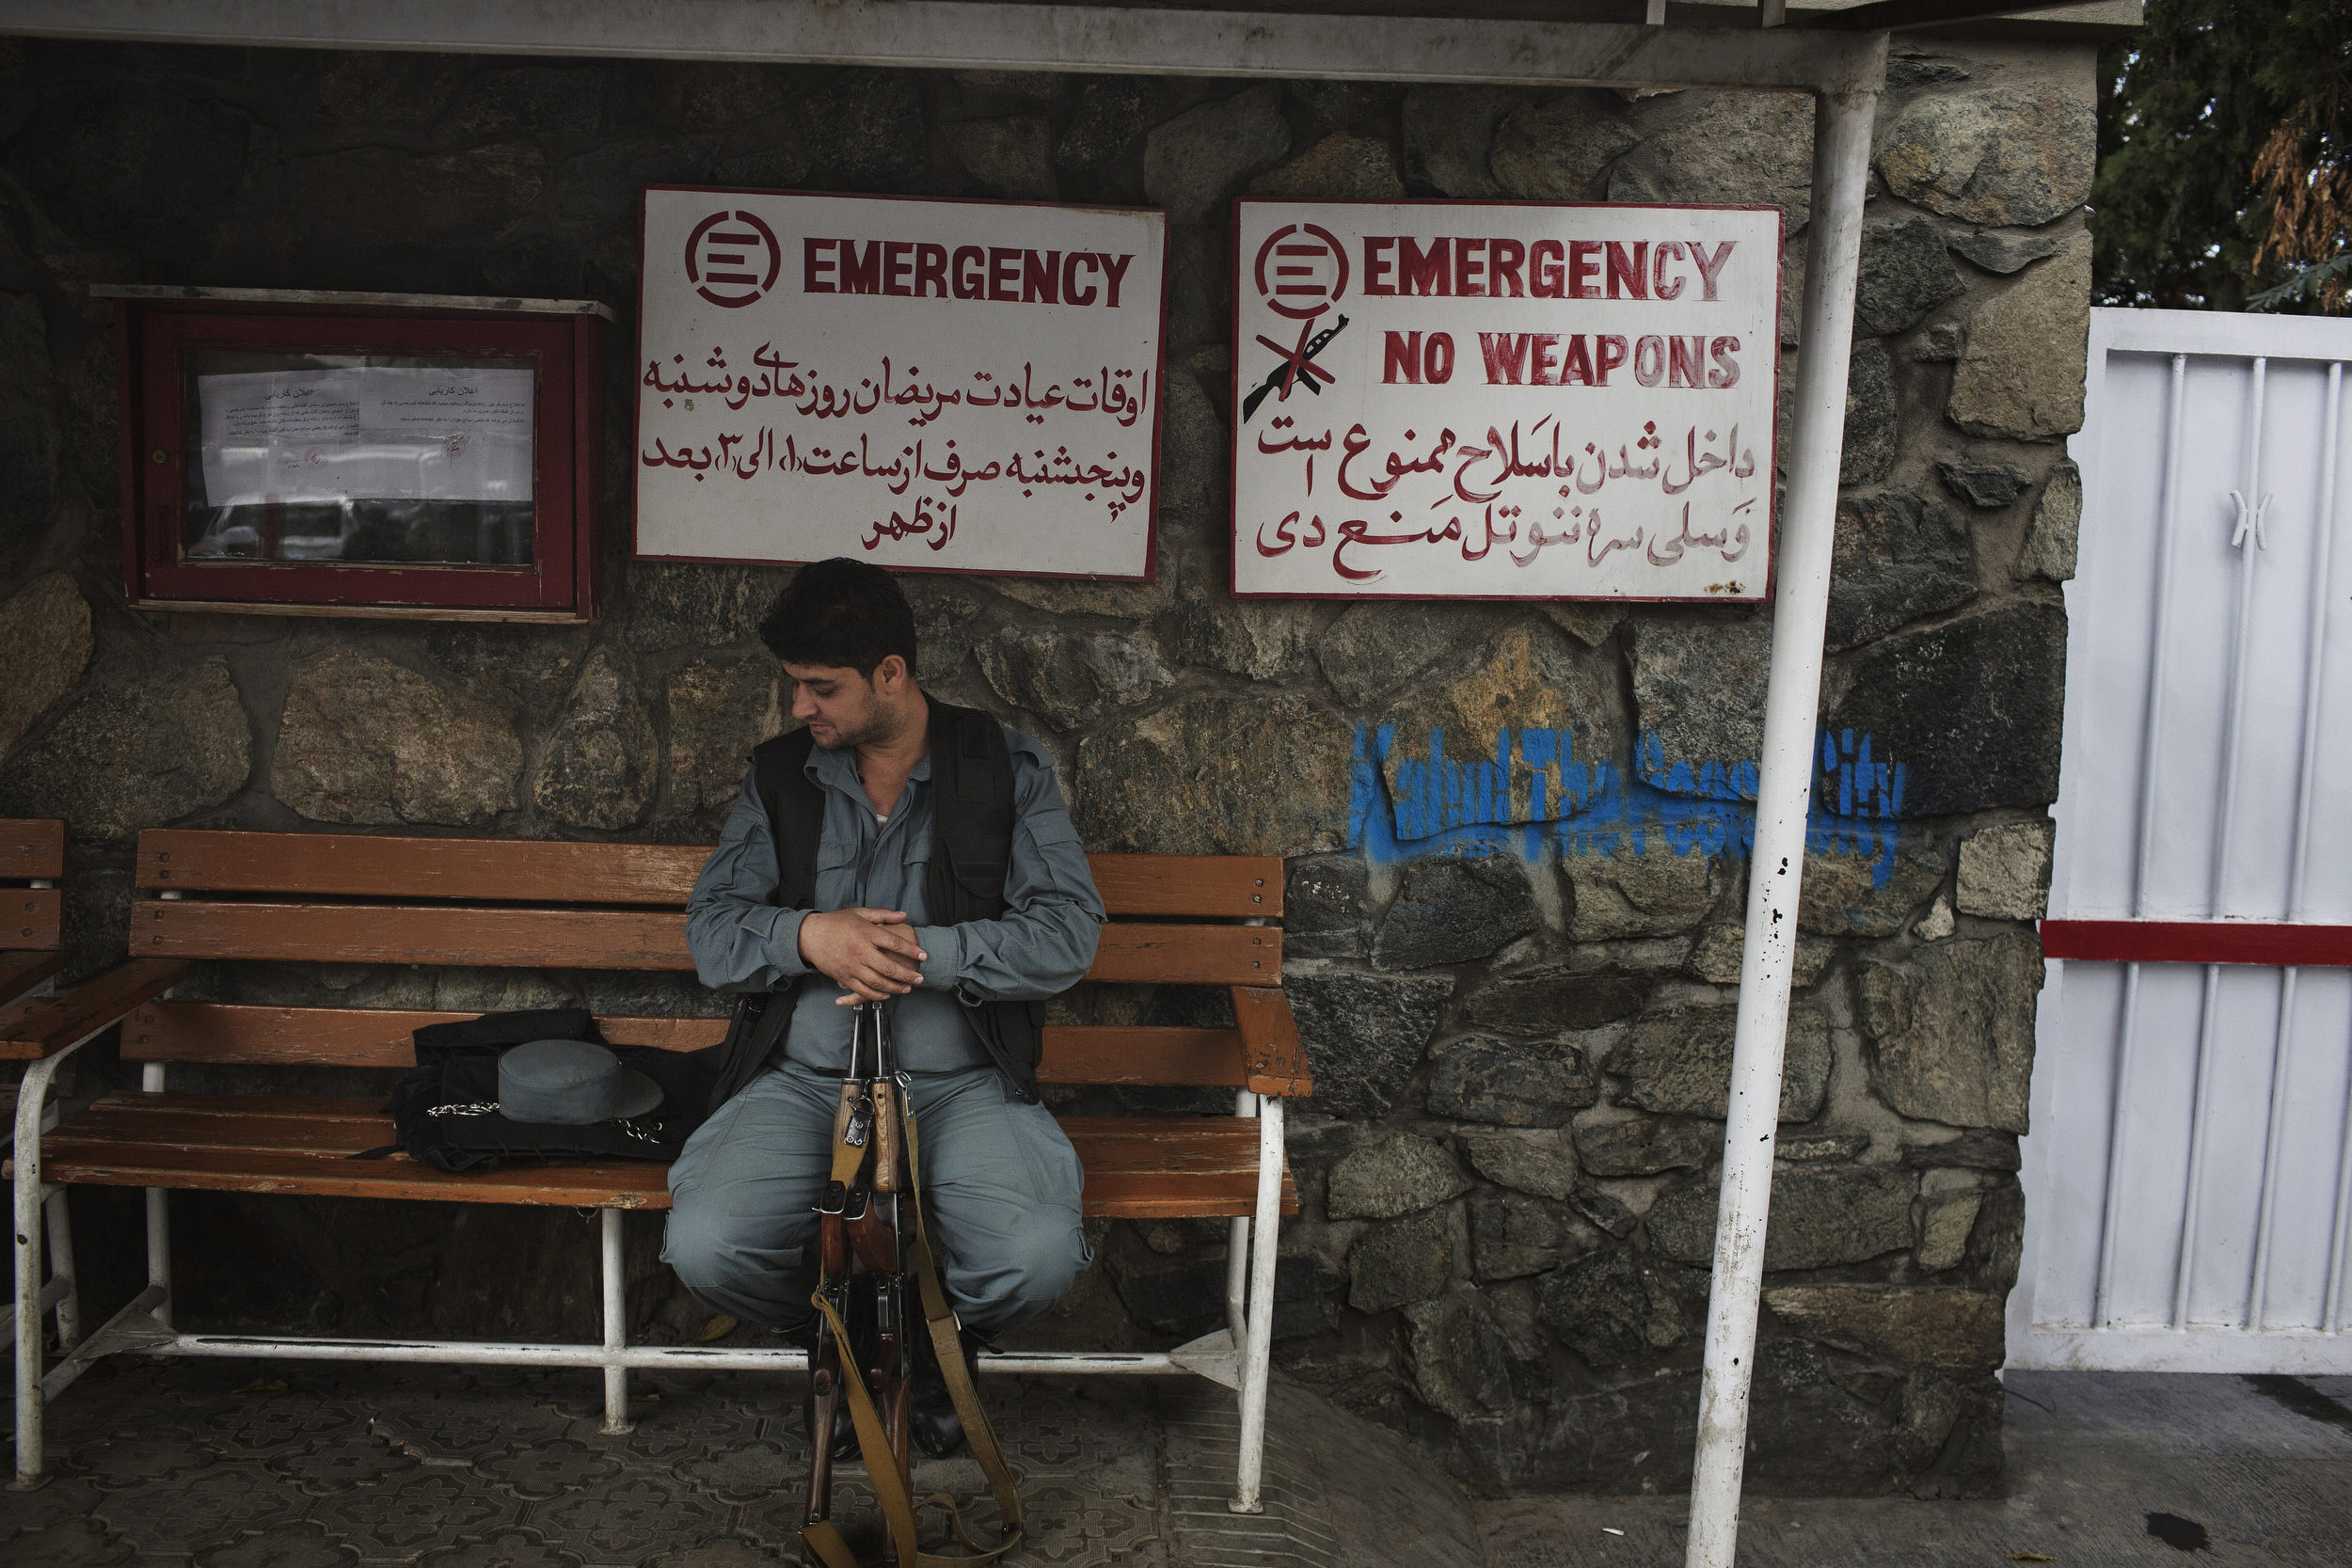  An Afghan policeman waits with his companions weapons, prohibited inside the hospital.&nbsp; 